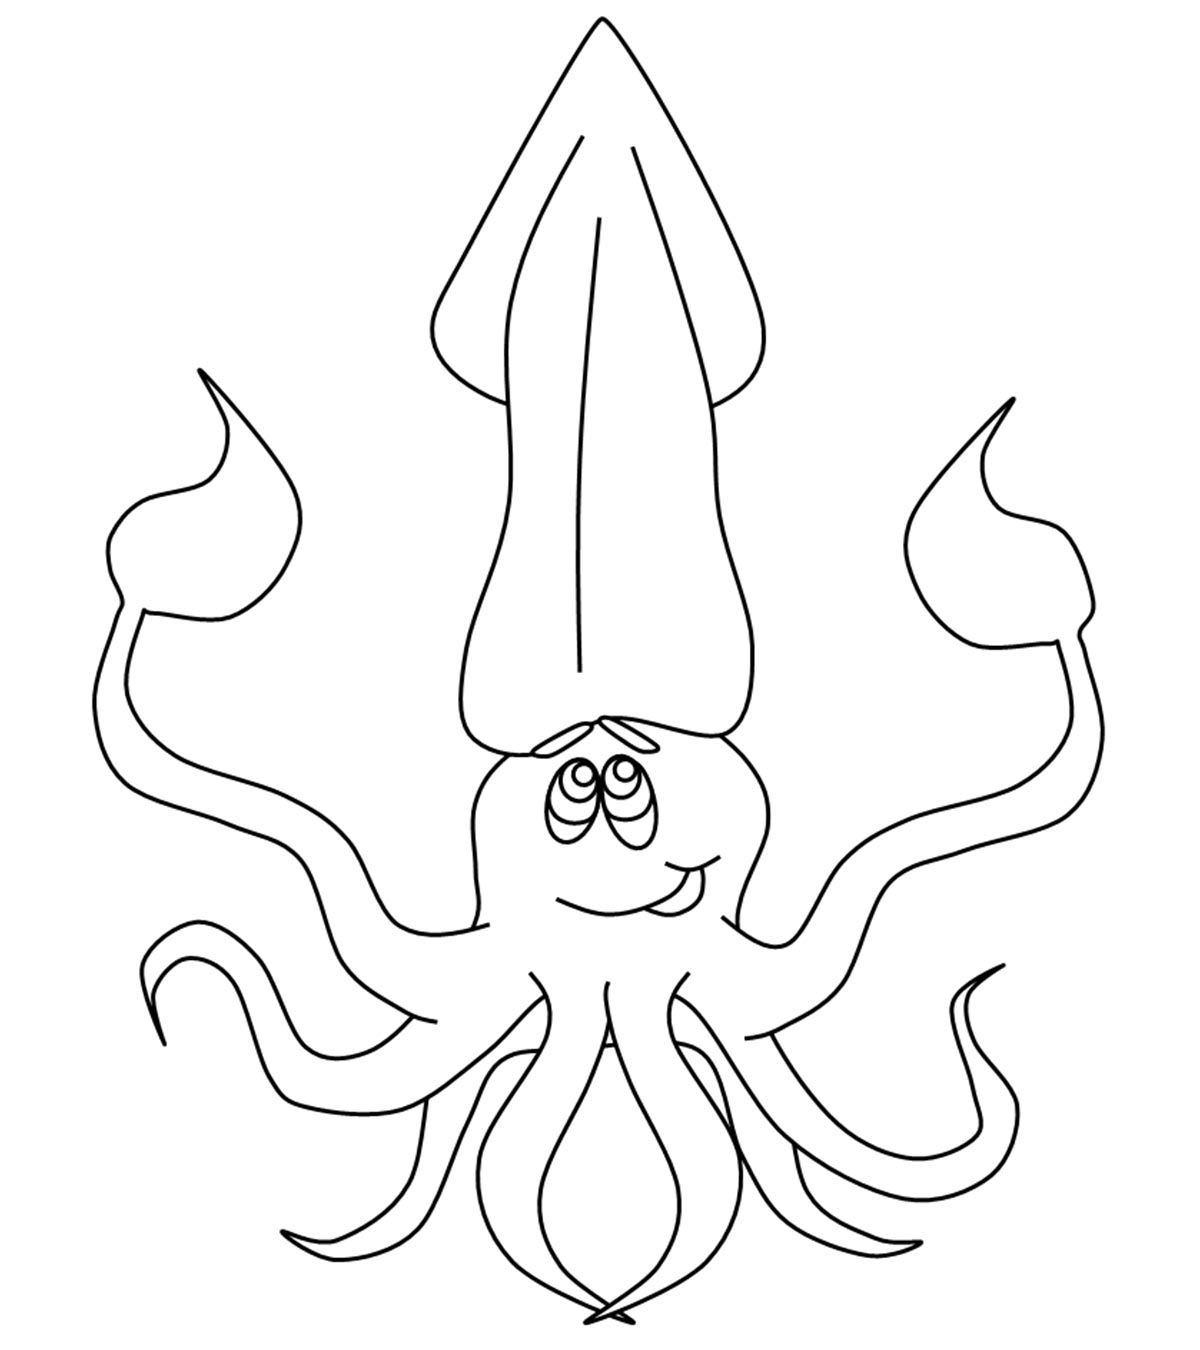 Squid Coloring Pages Printable Top 10 Free Printable Squid Coloring Pages Online